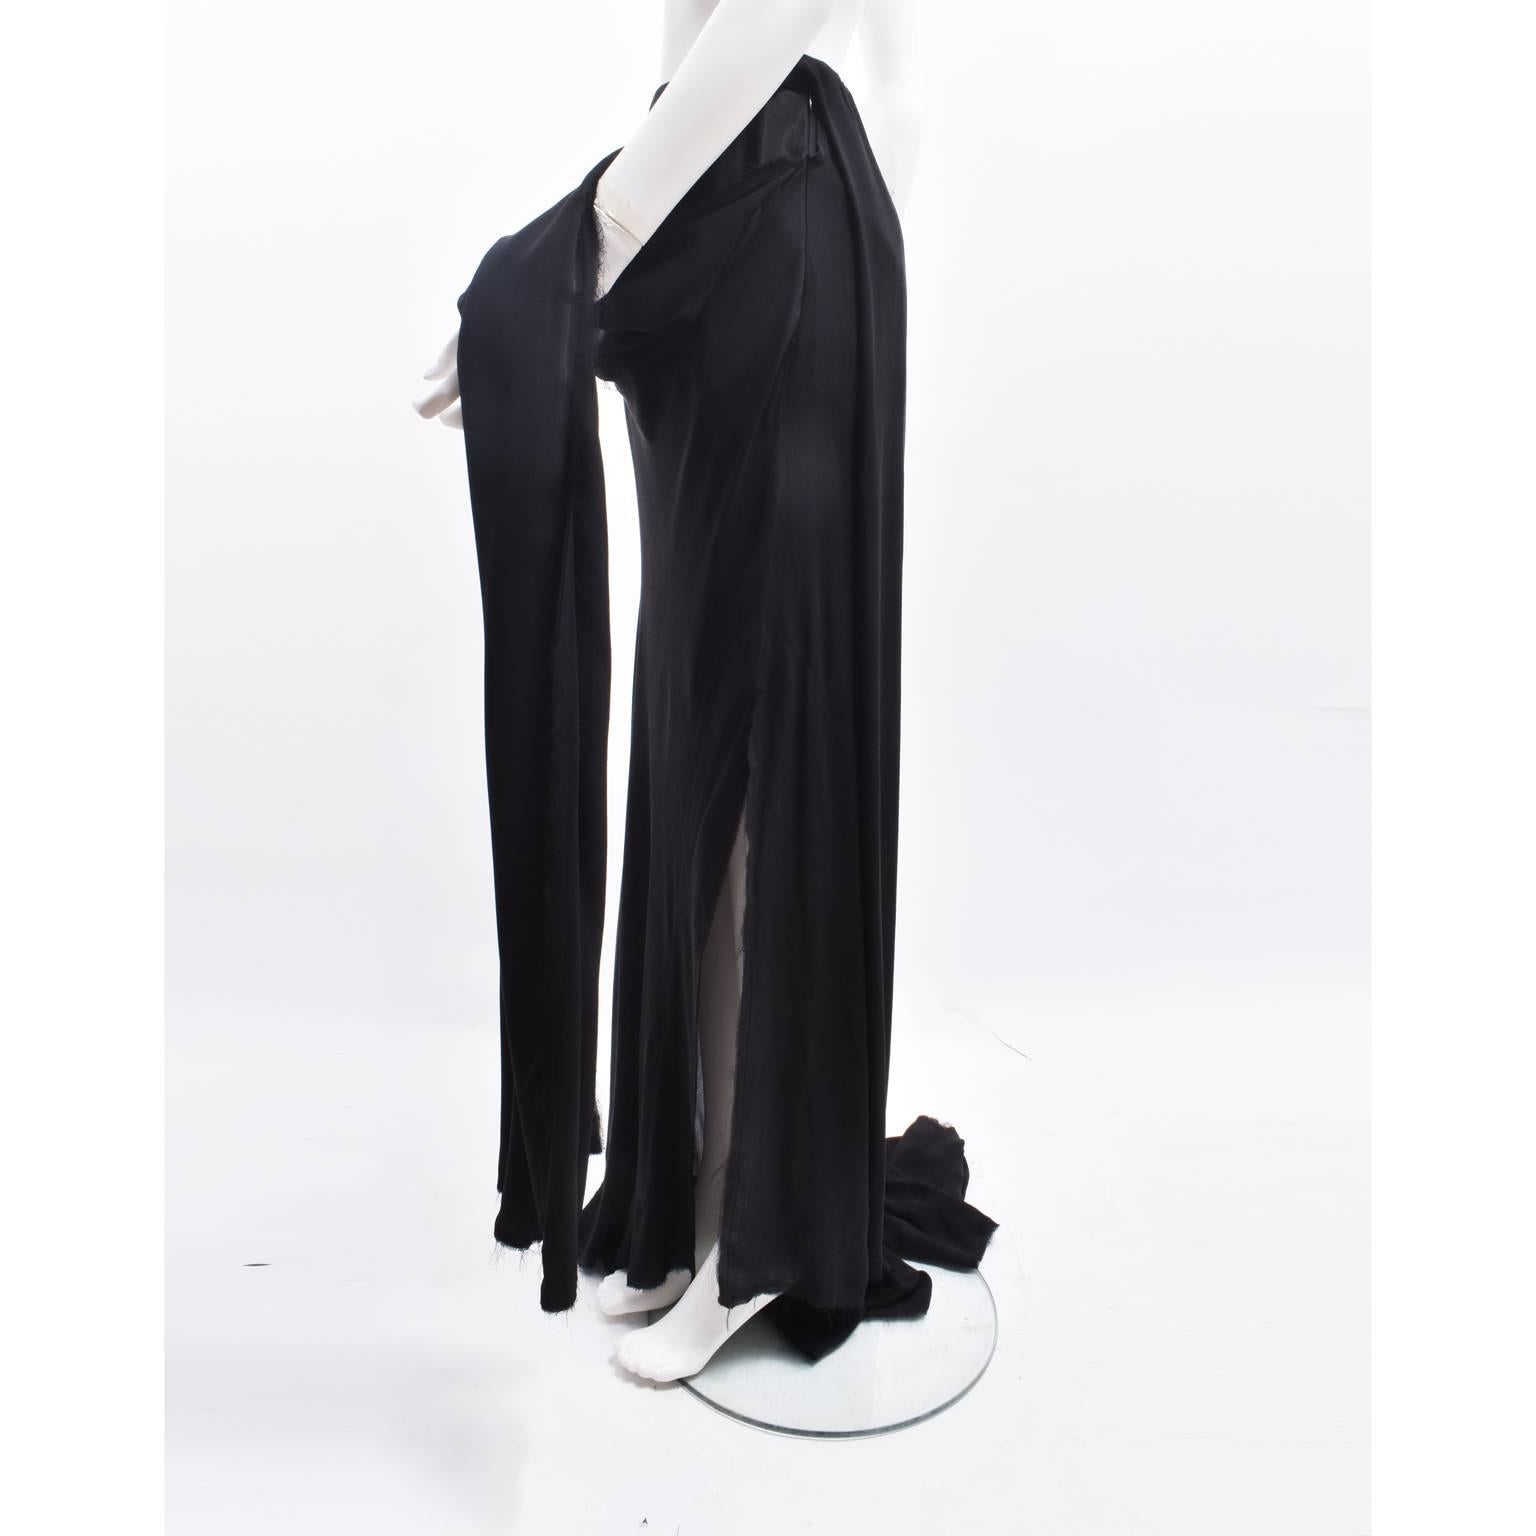 Women's Vivienne Westwood ‘Acorn’ Black Asymmetric Skirt with Side Knot and Slit Details For Sale